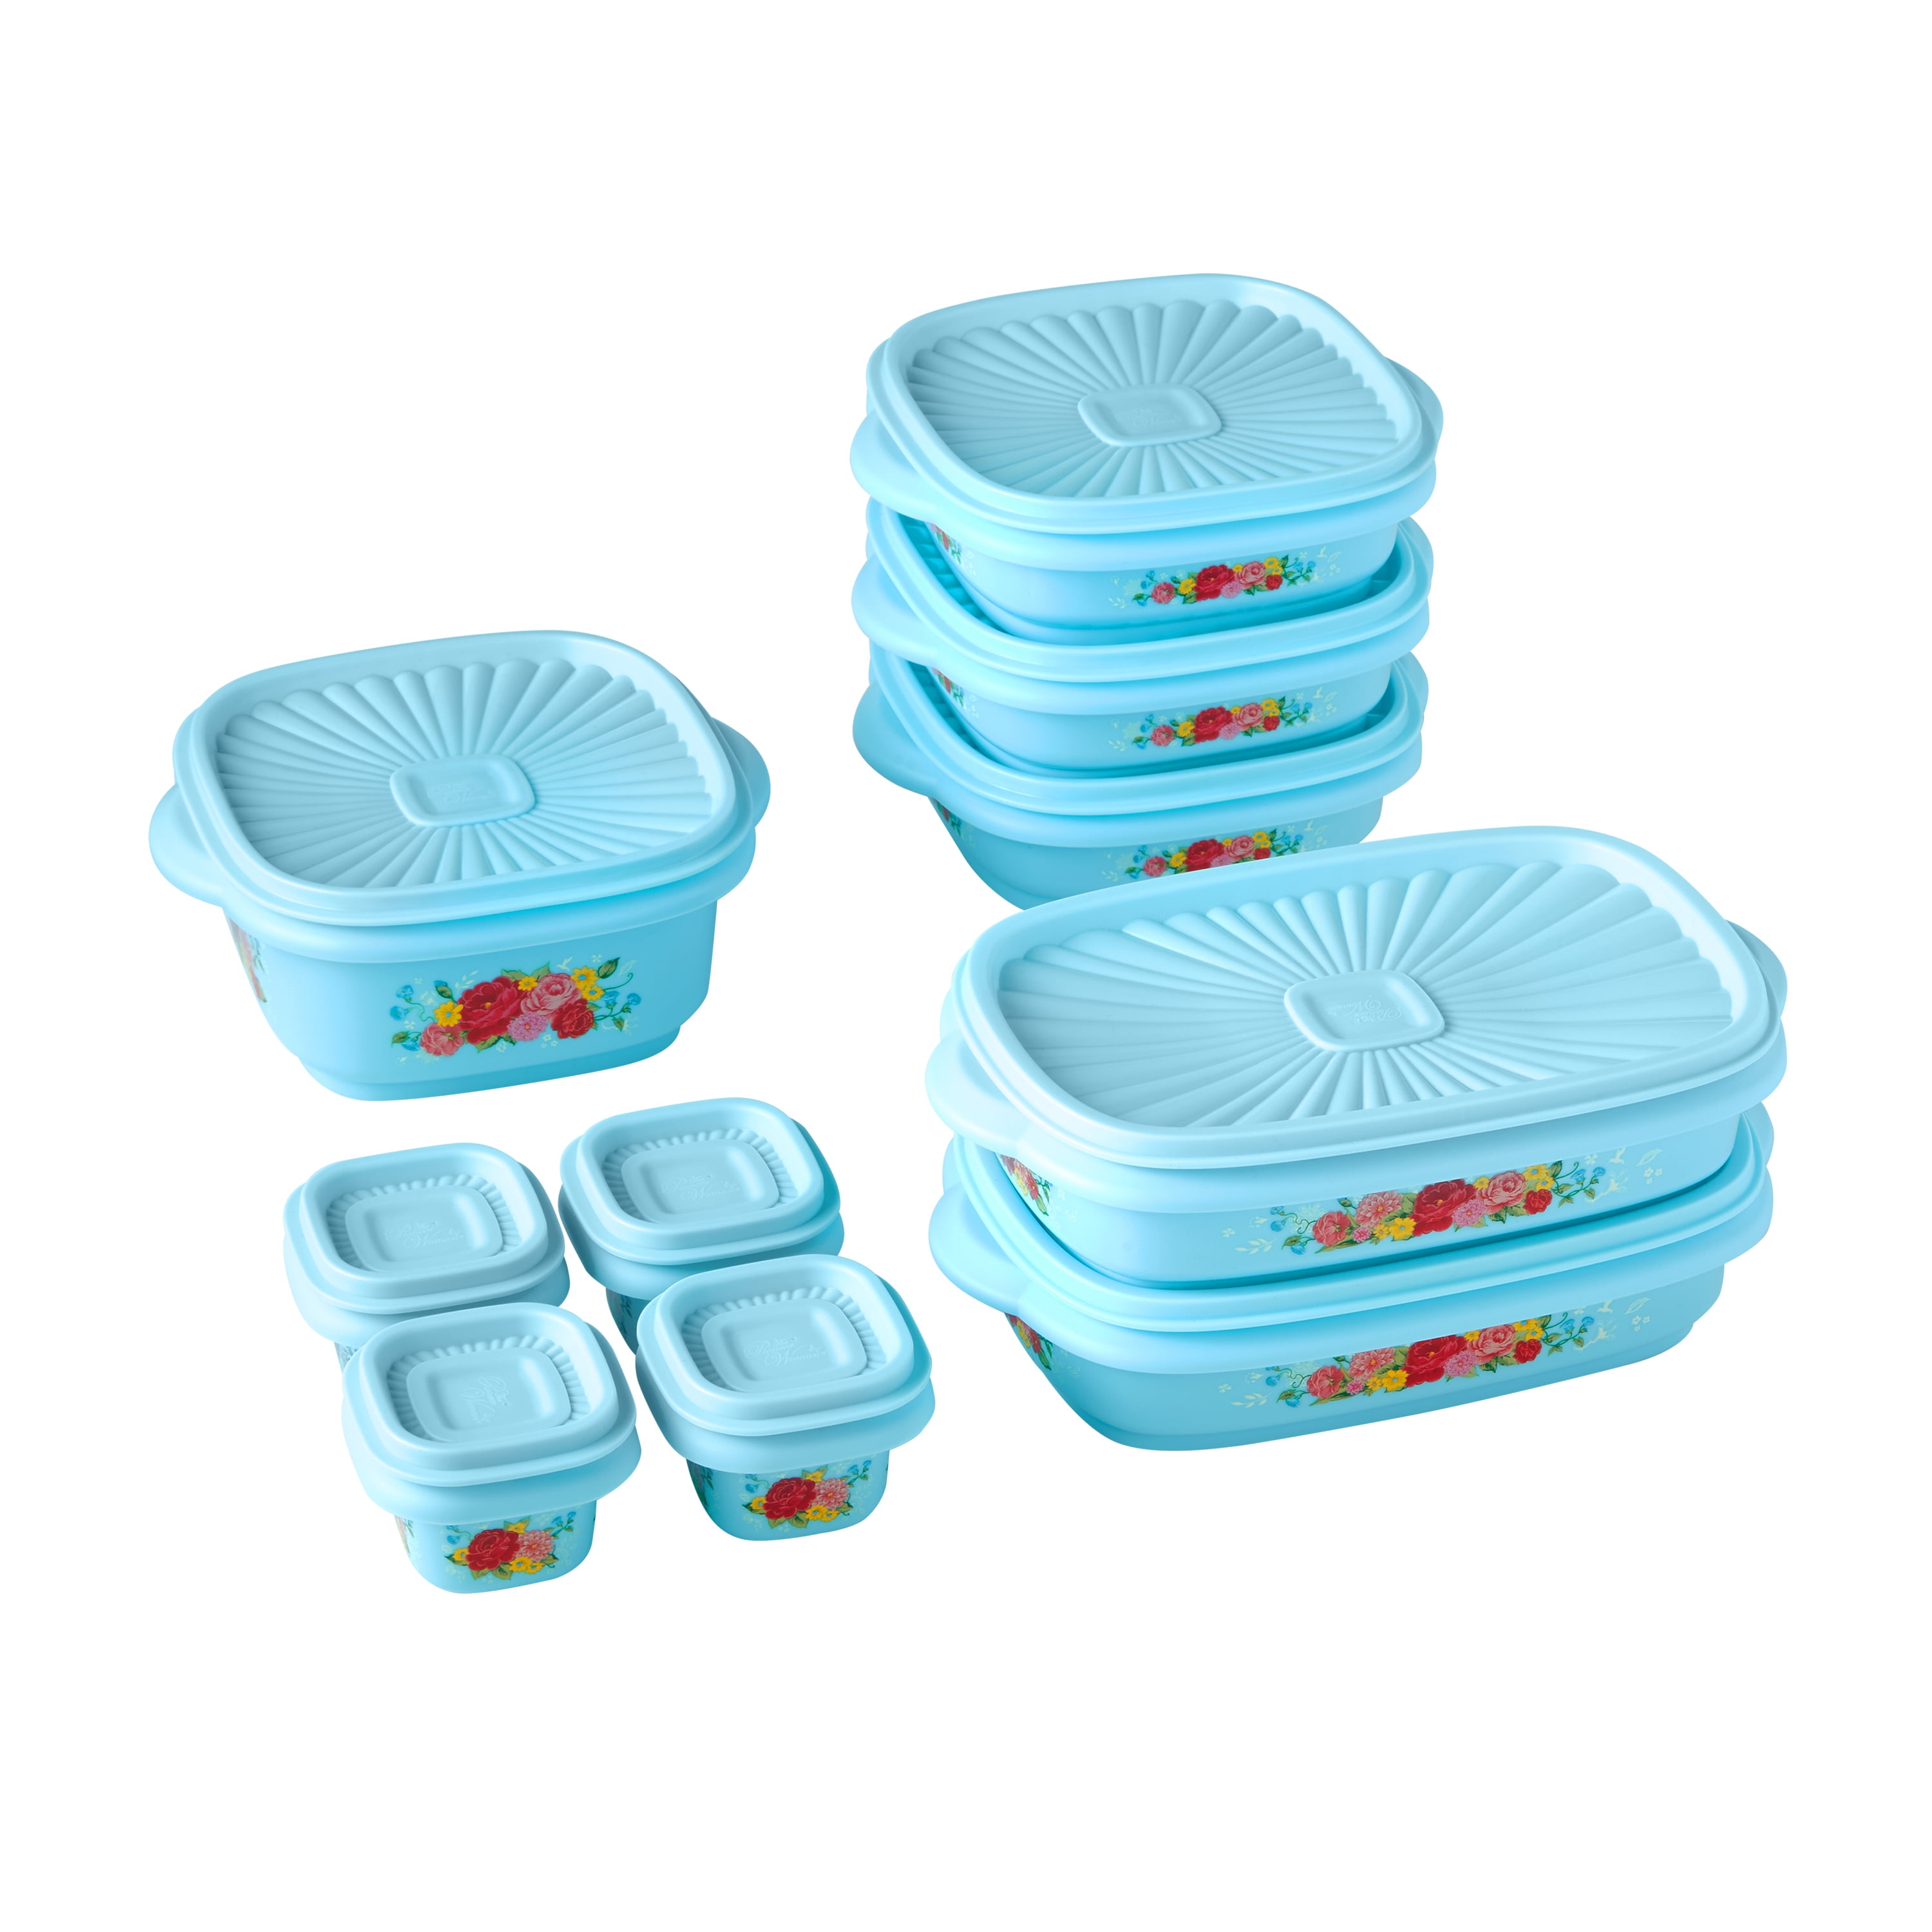  40 PCS Food Storage Containers with Lids Airtight (20